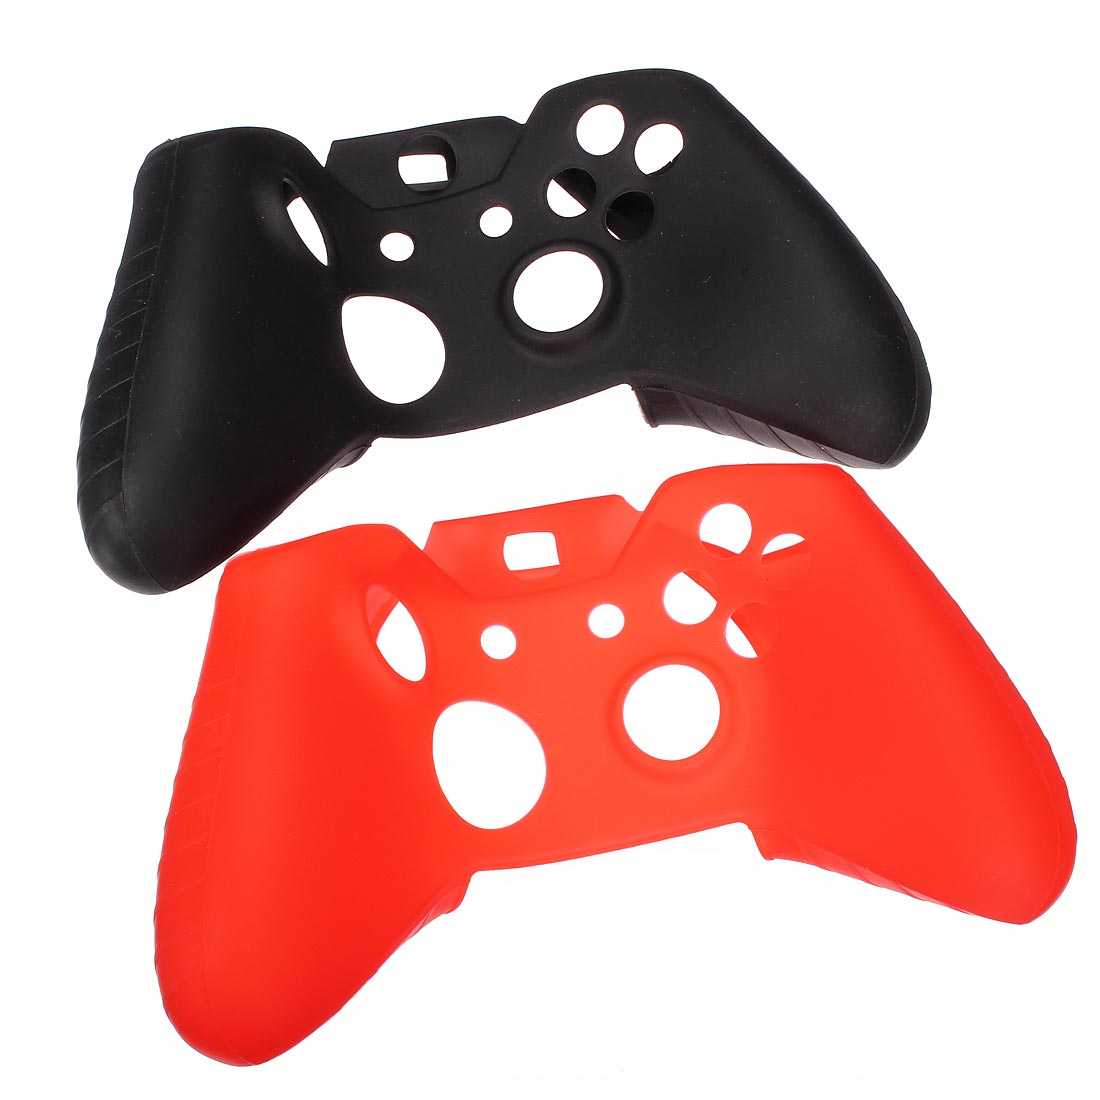 Durable Silicone Protective Case Cover For XBOX ONE Controller 2